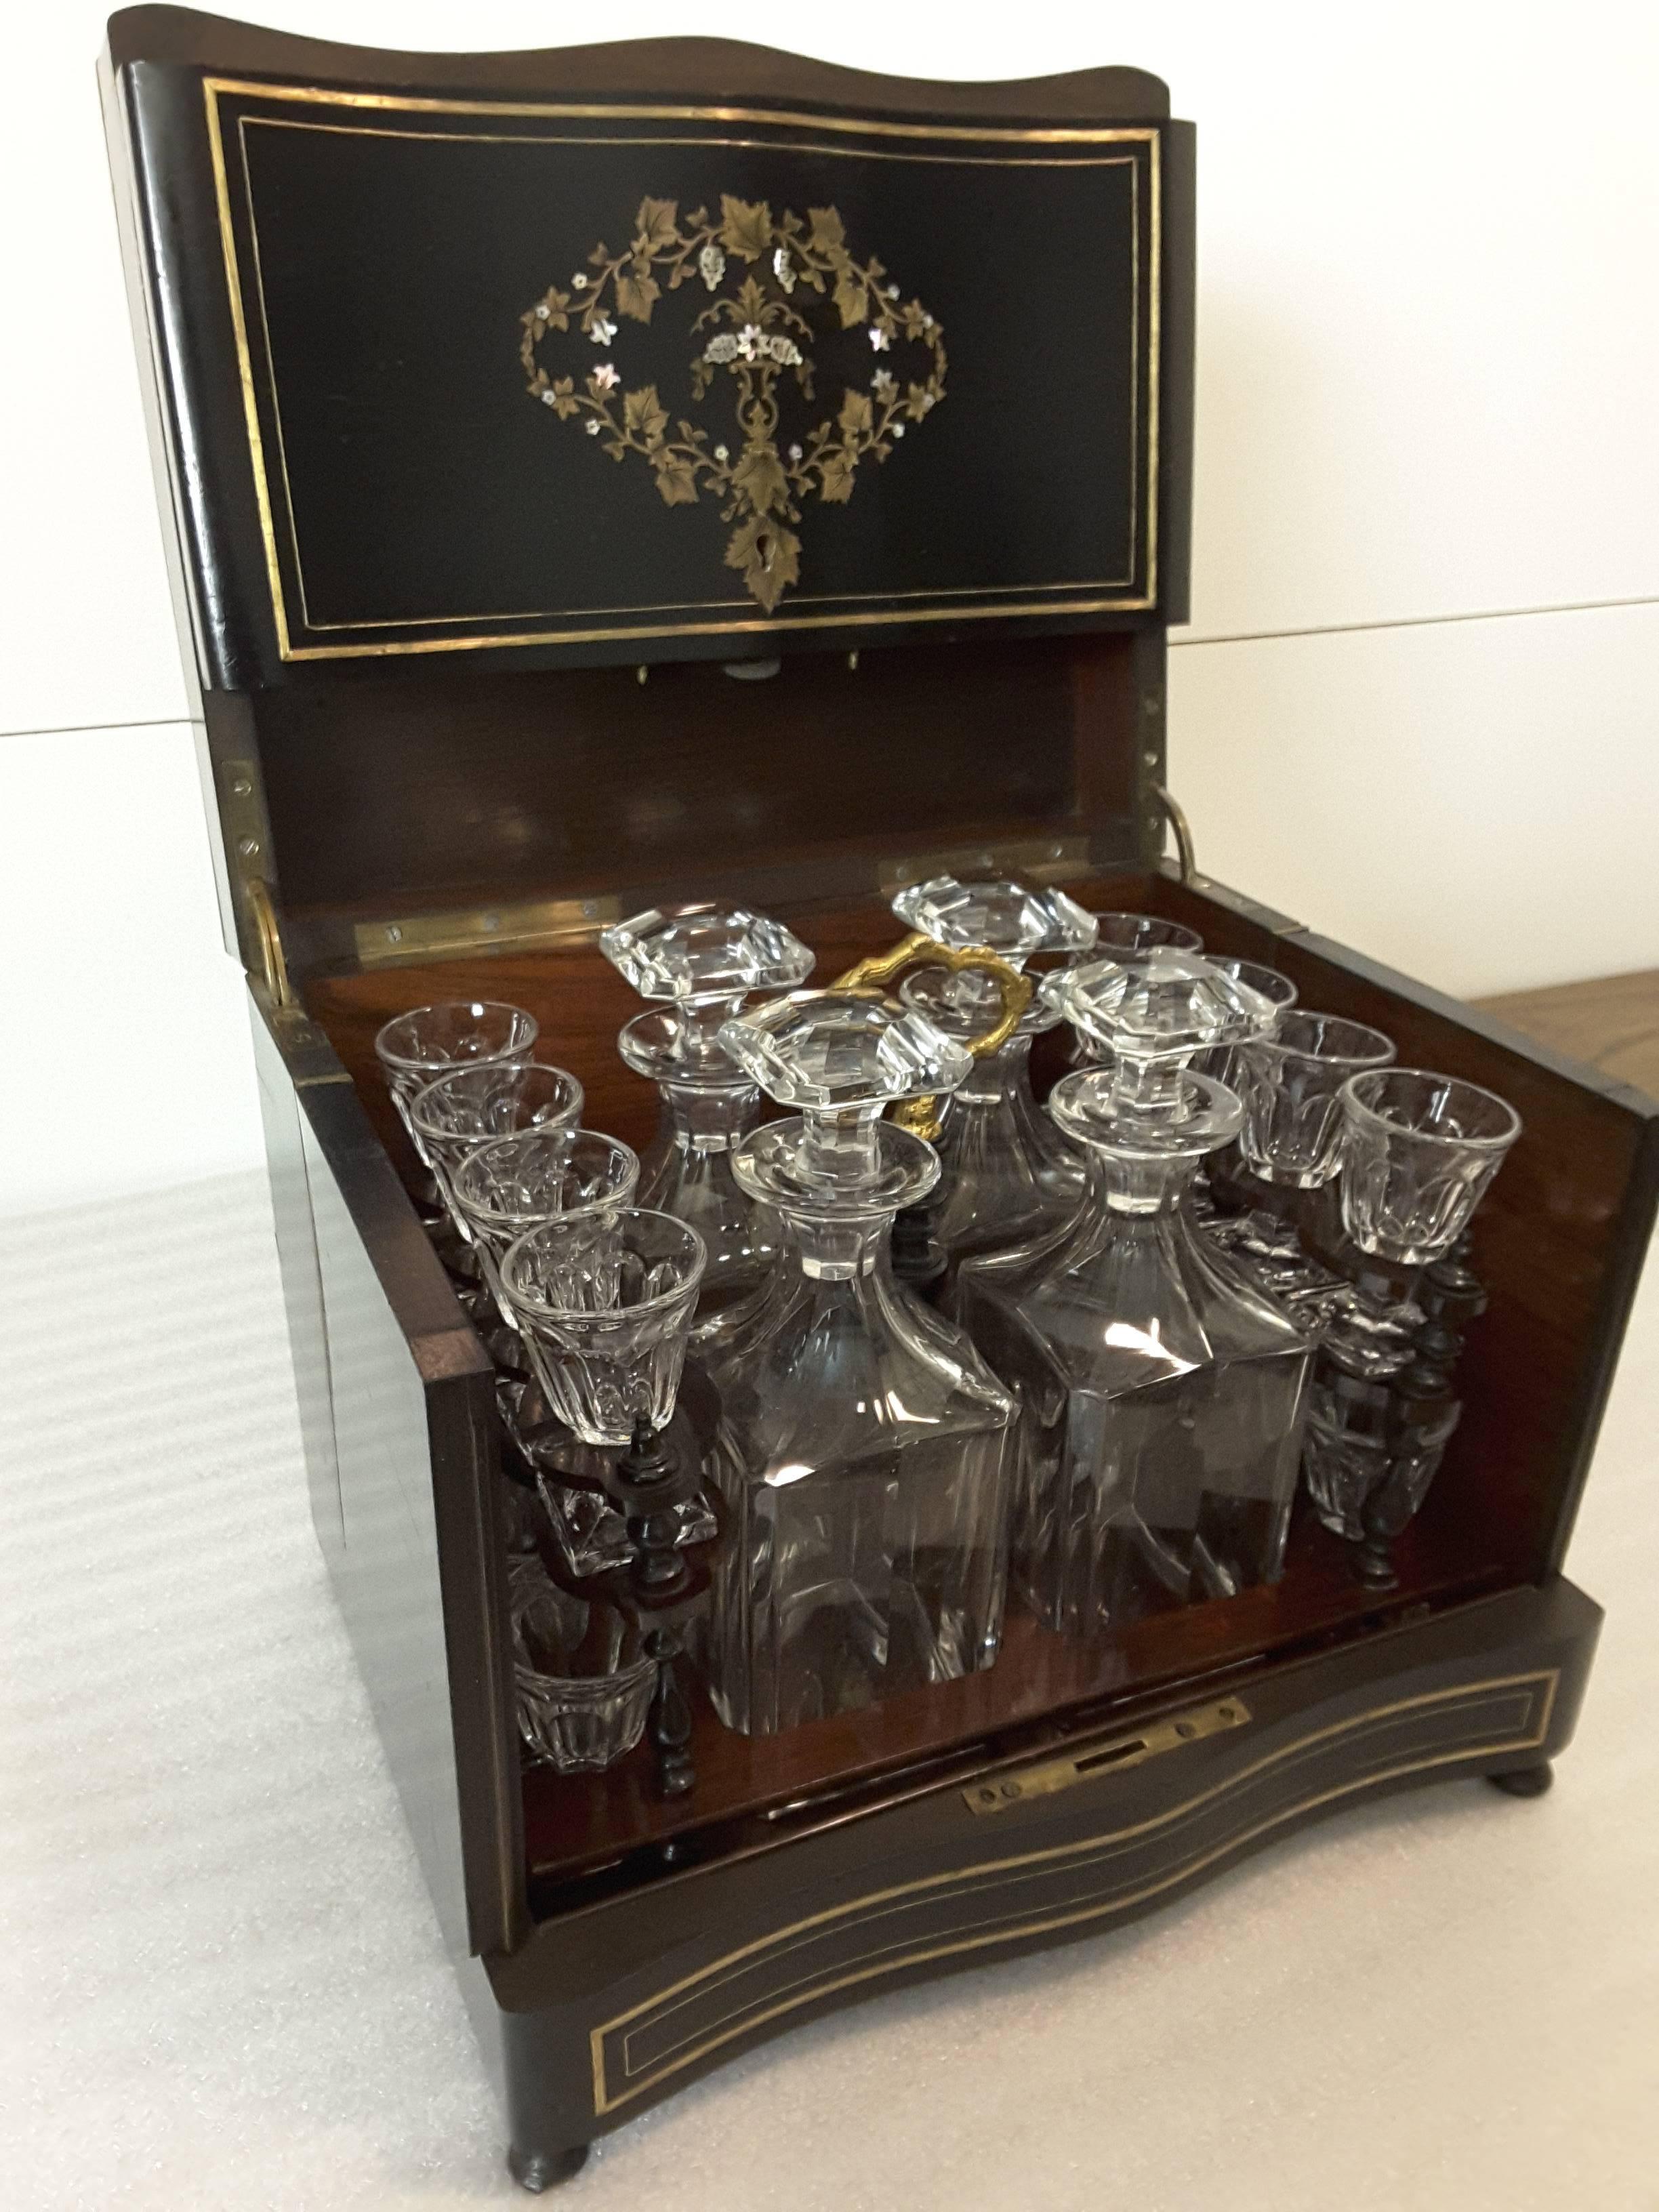 A fine 19th century, French, Napoleon III complete cave à liqueur / tantalus / liqueur / decanter set in cabinet. The set consists of 4 decanters and 16 glasses in a removable rosewood and brass insert. The case is done in ebonized mahogany,